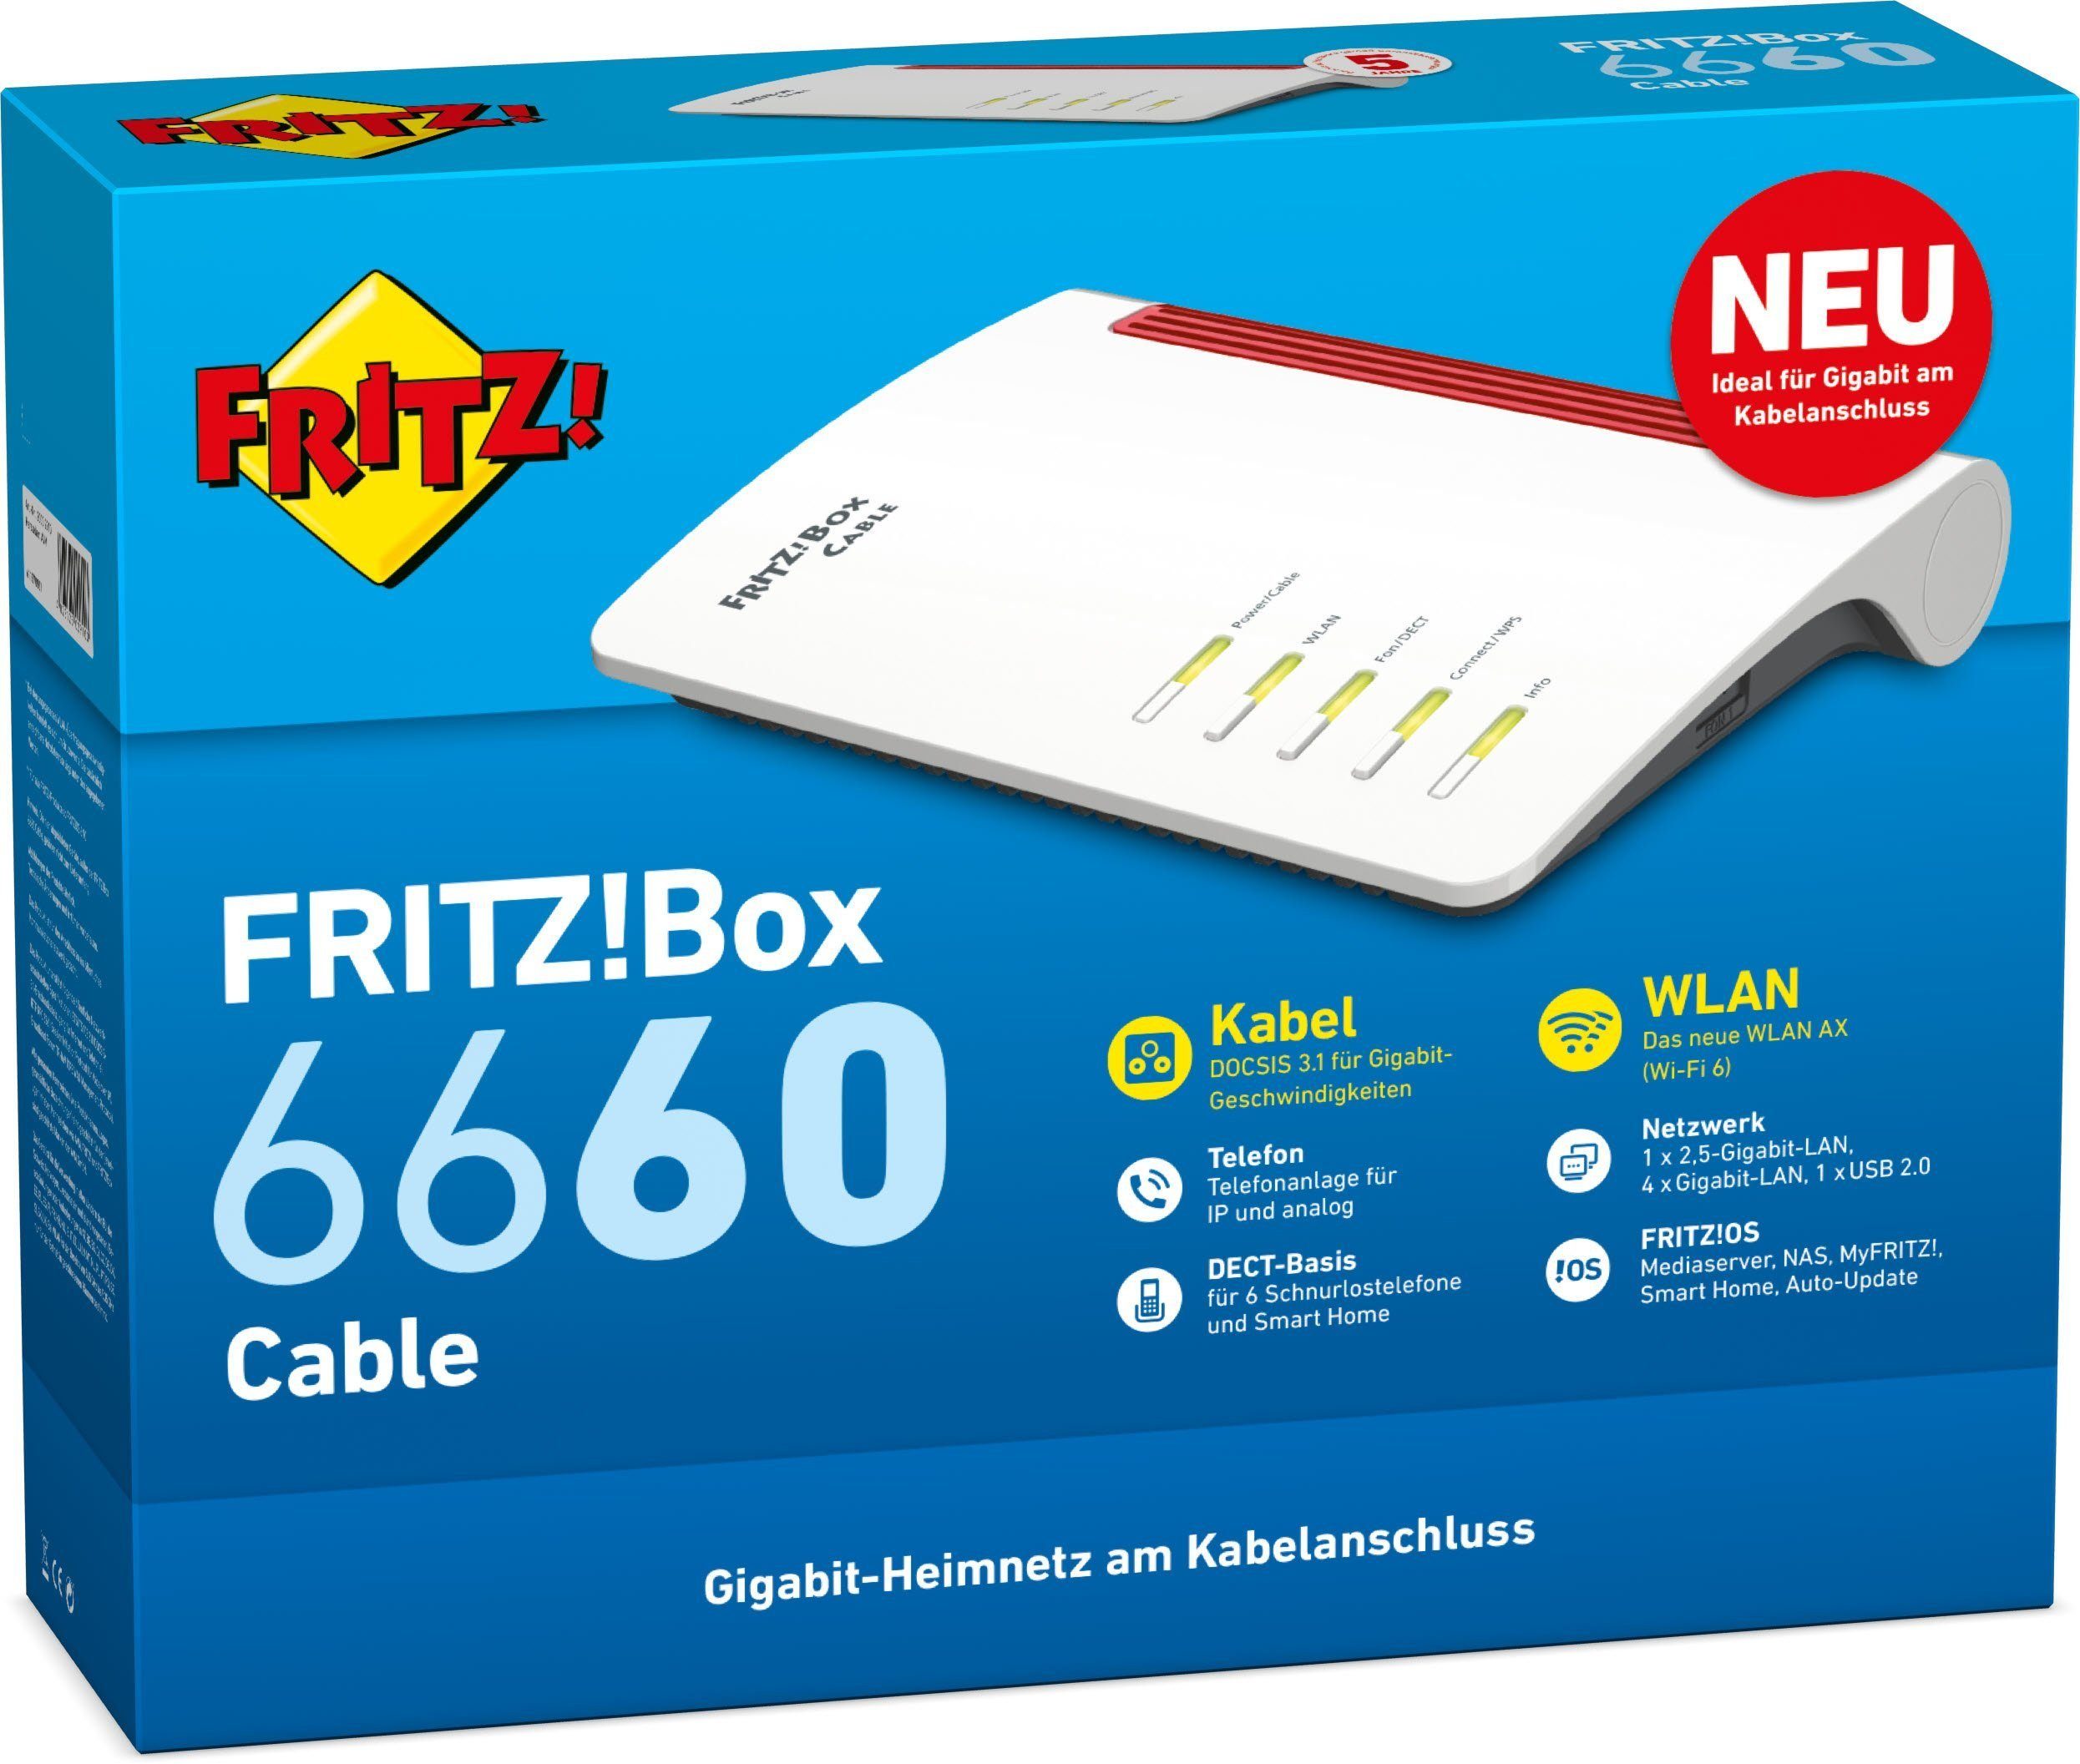 AVM FRITZ!Box WLAN-Router 6660 Cable